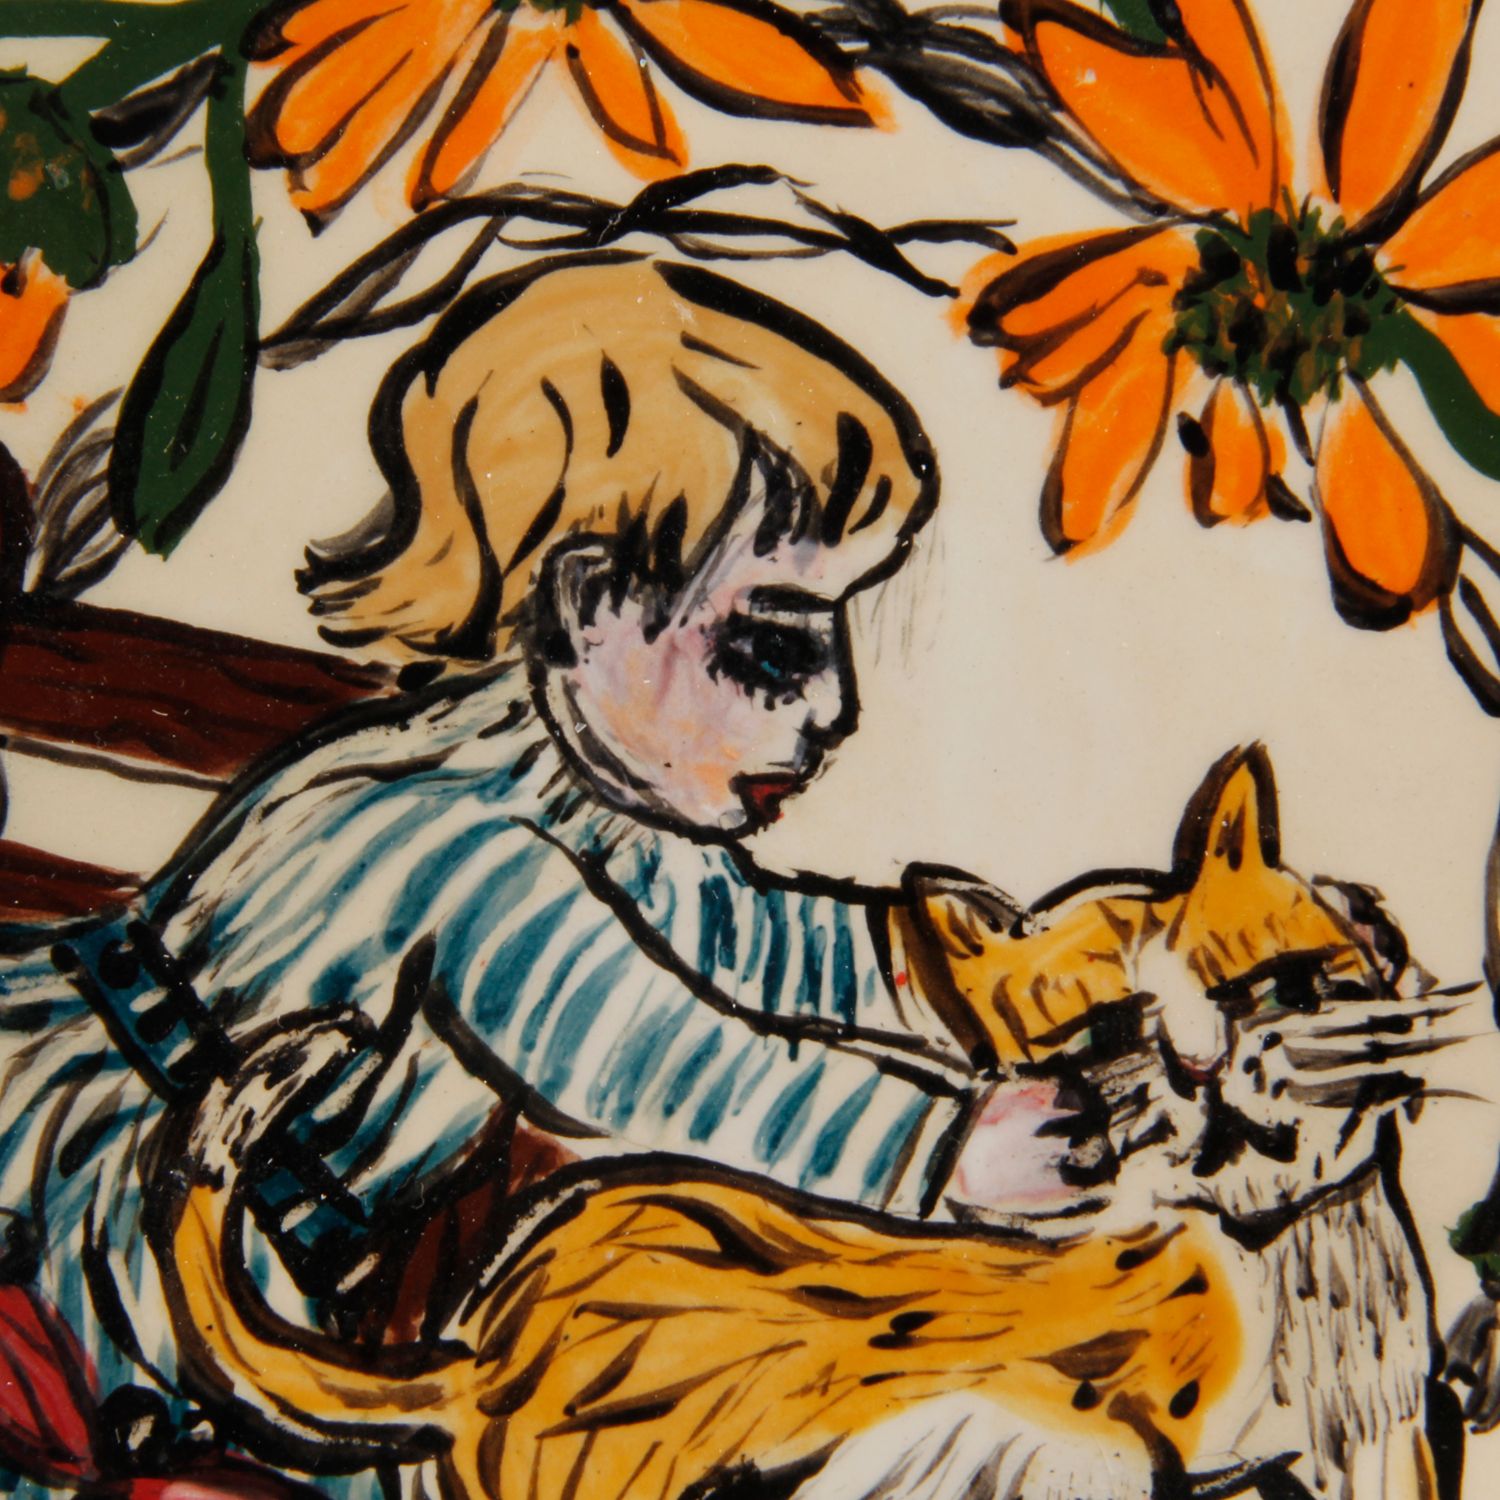 Patricia Lazar: Small Plate with Girl and Cat Product Image 3 of 3